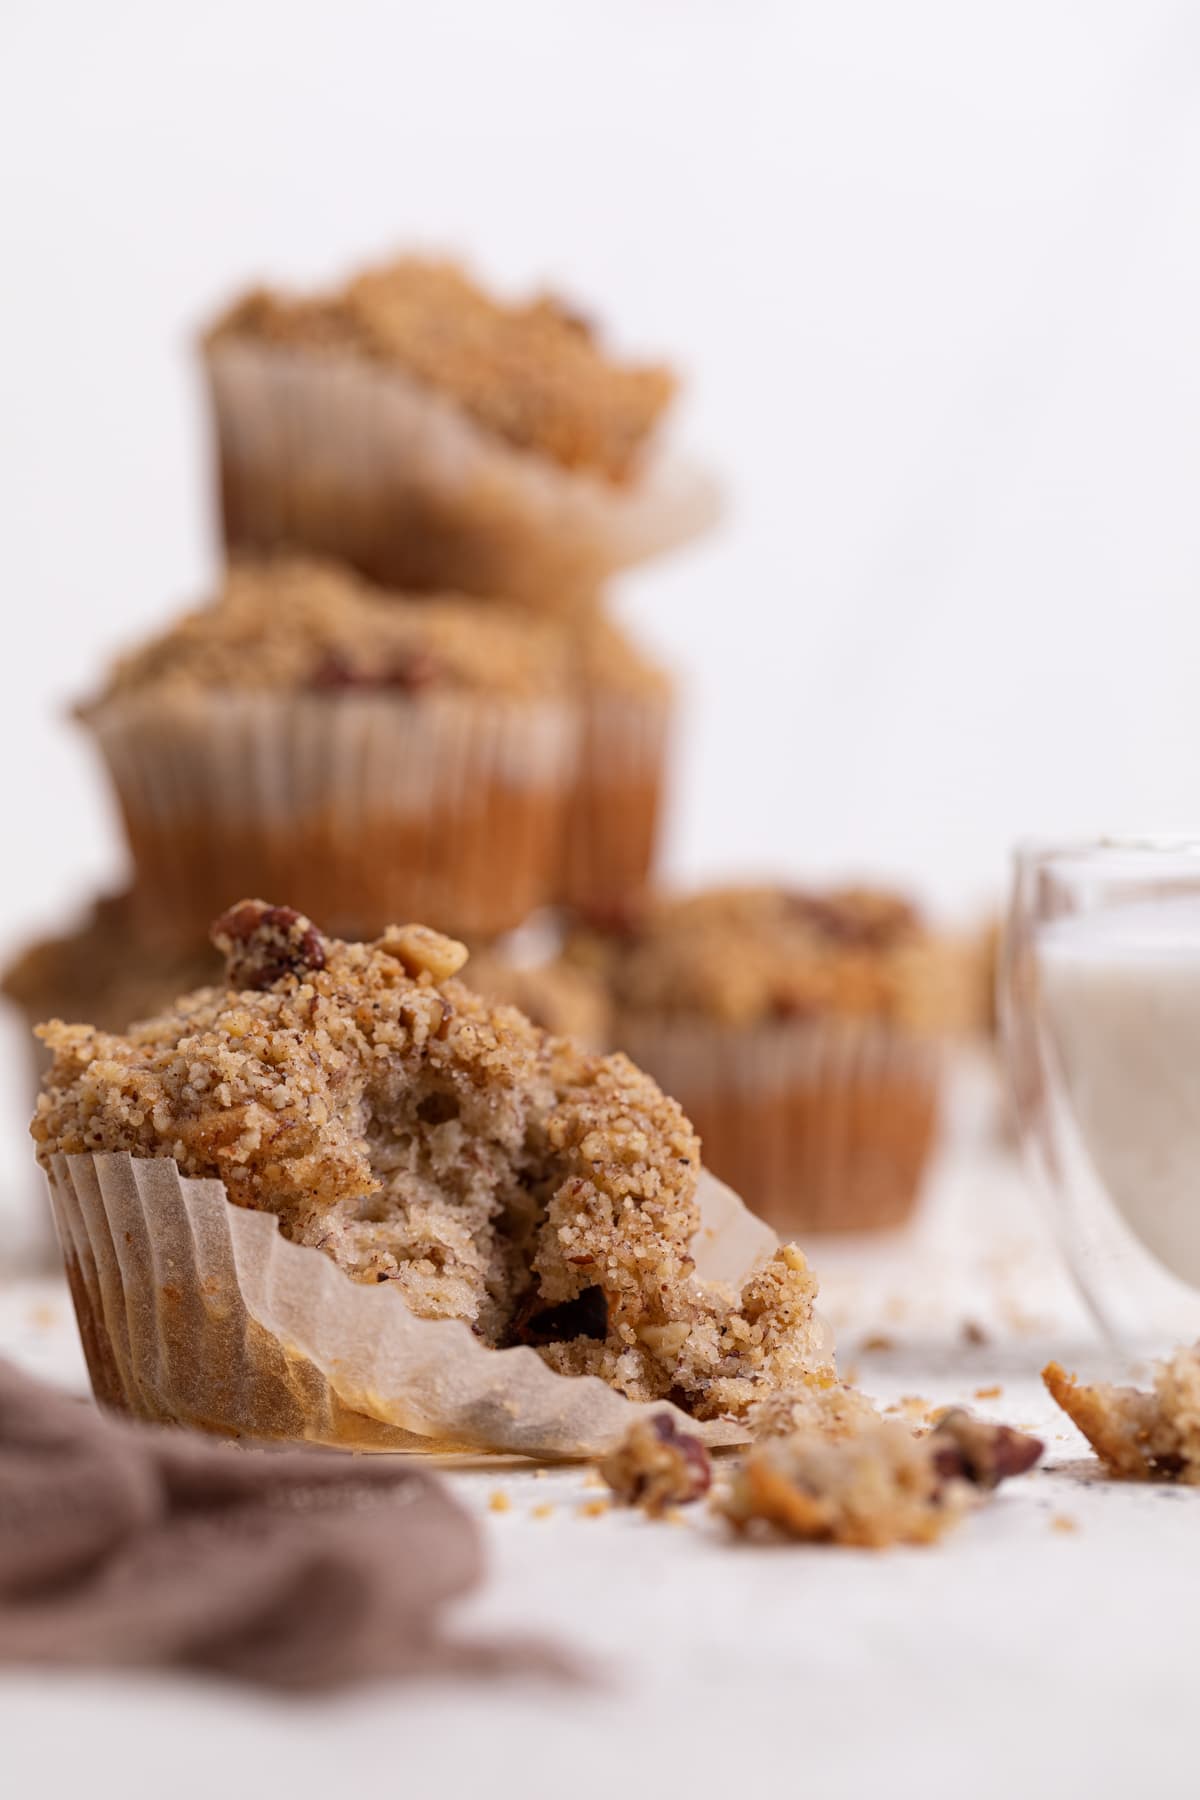 Vegan Banana Muffins with cinnamon streusel with a bite taken out